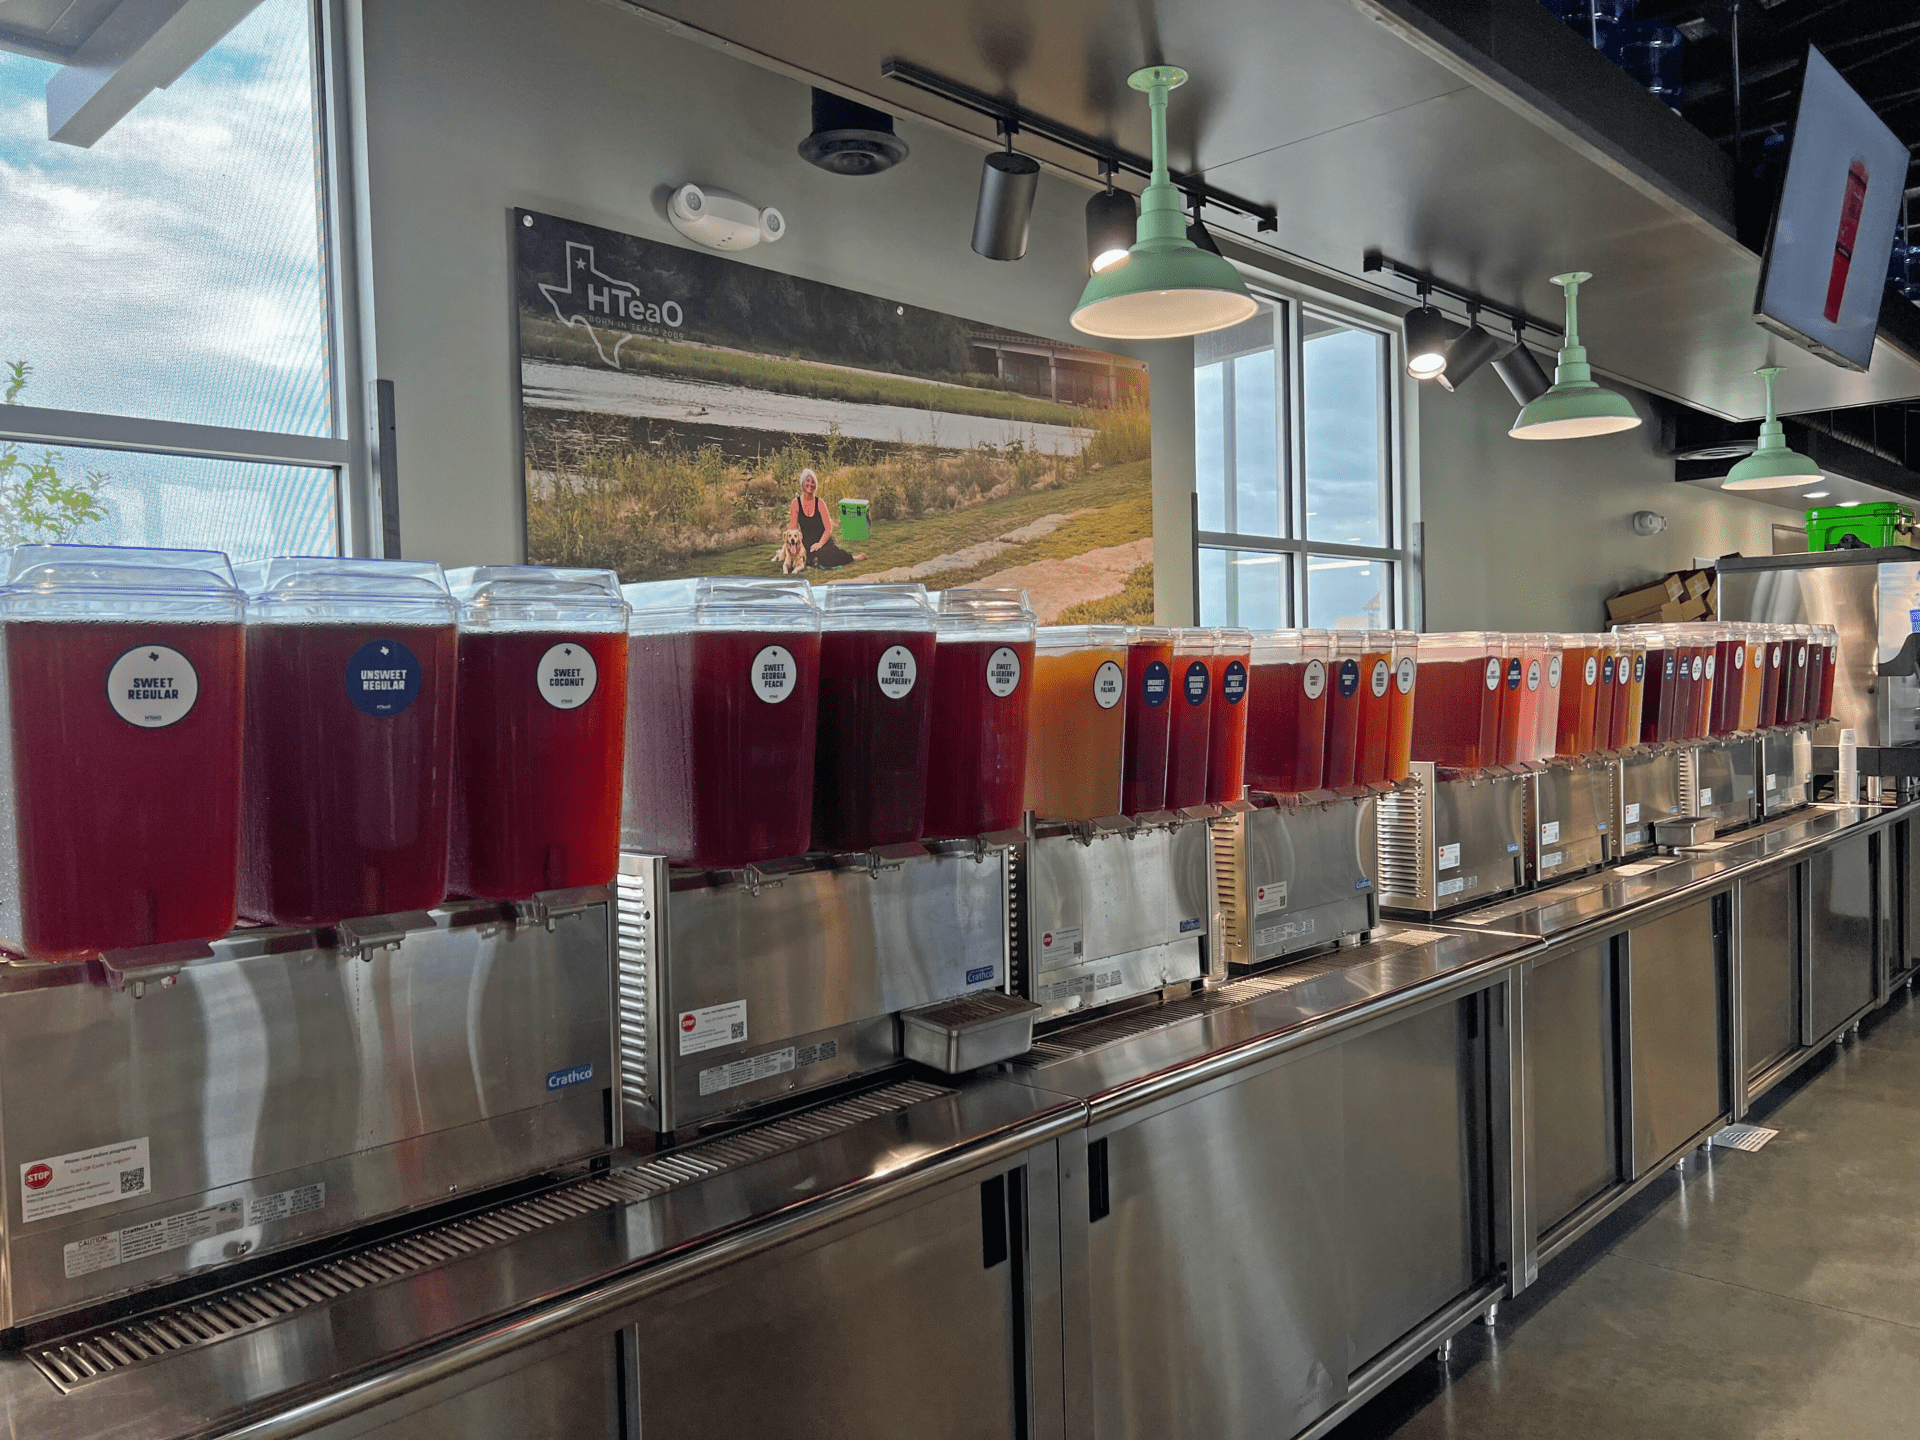 A row of containers filled with different colors and flavors of tea.